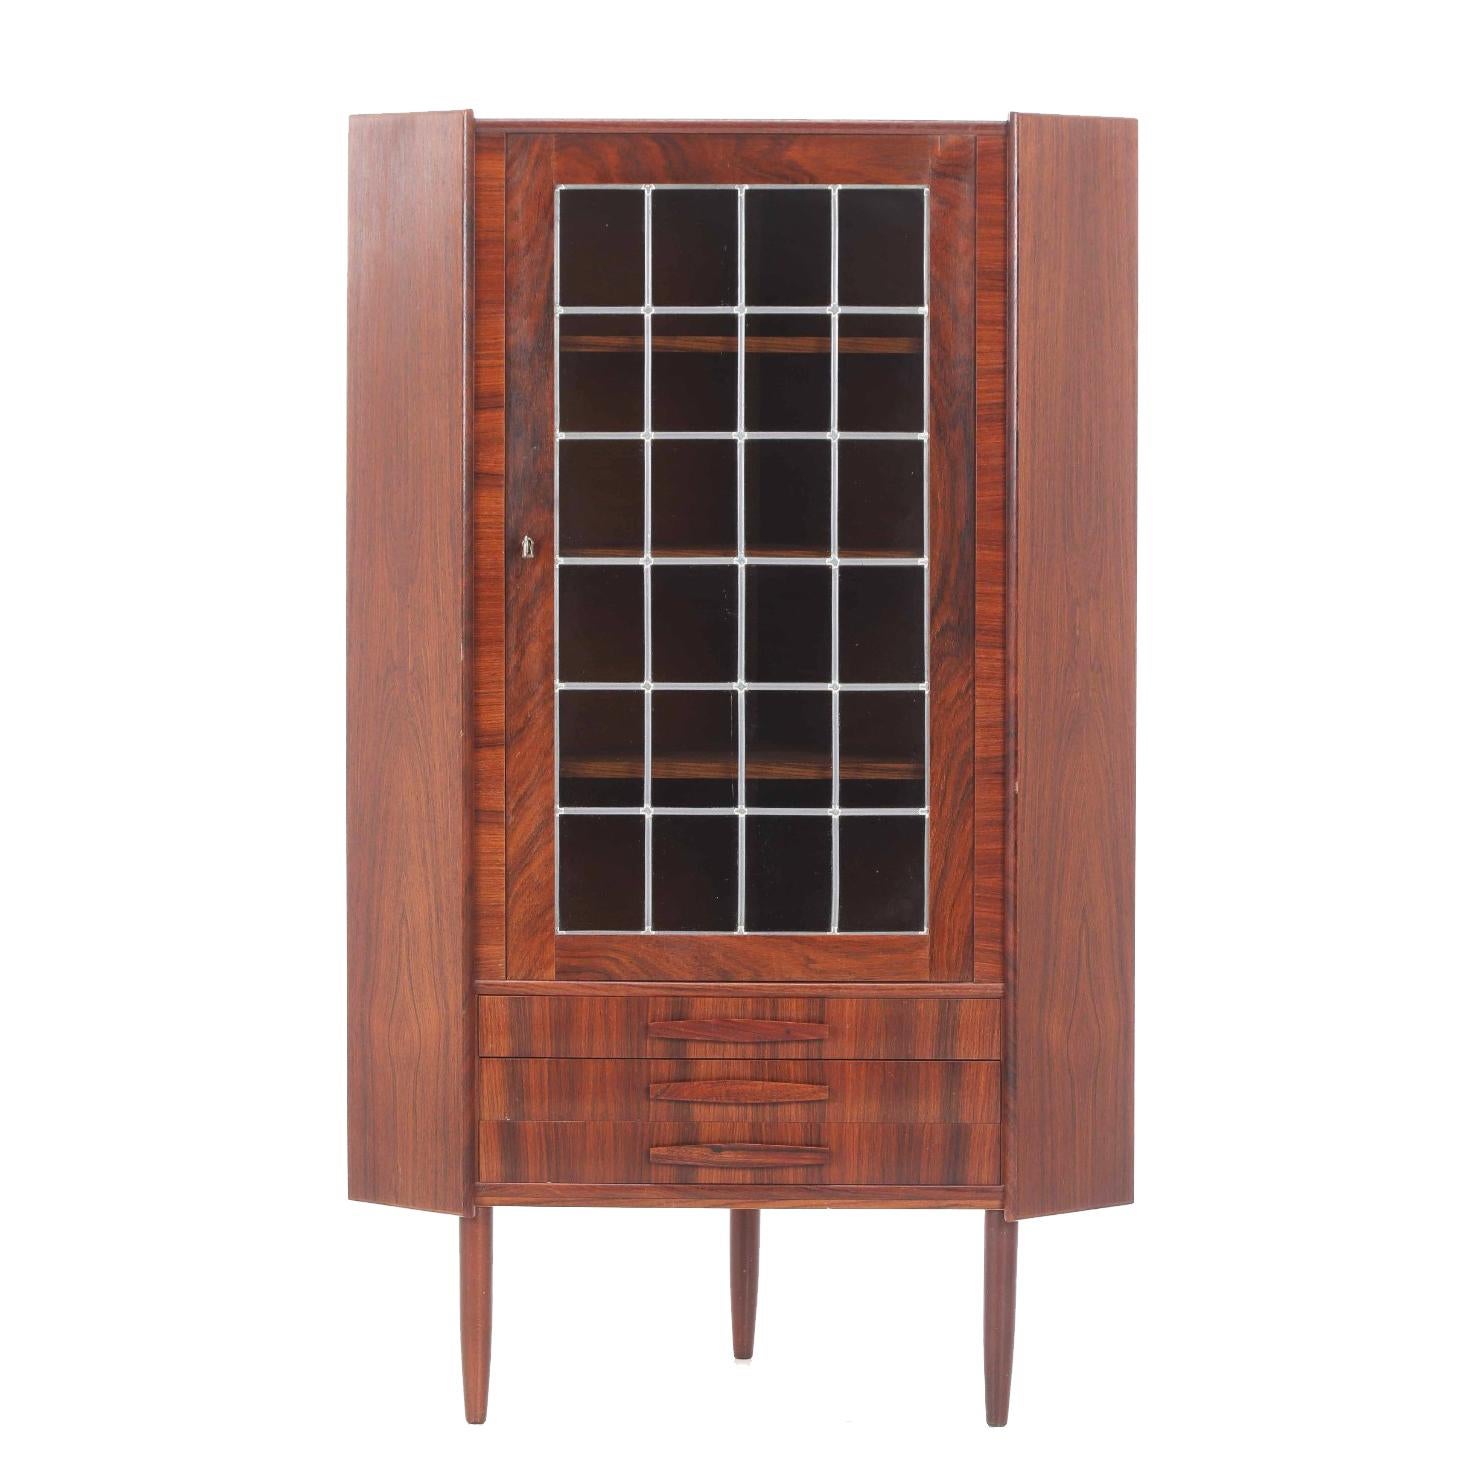 Vintage Danish rosewood corner cabinet from the 1960s, with a single large door, three drawers with match wood grain. Adjustable shelves inside. With lock and key. 

All pieces of furniture can be restored professionally to a vintage condition. The